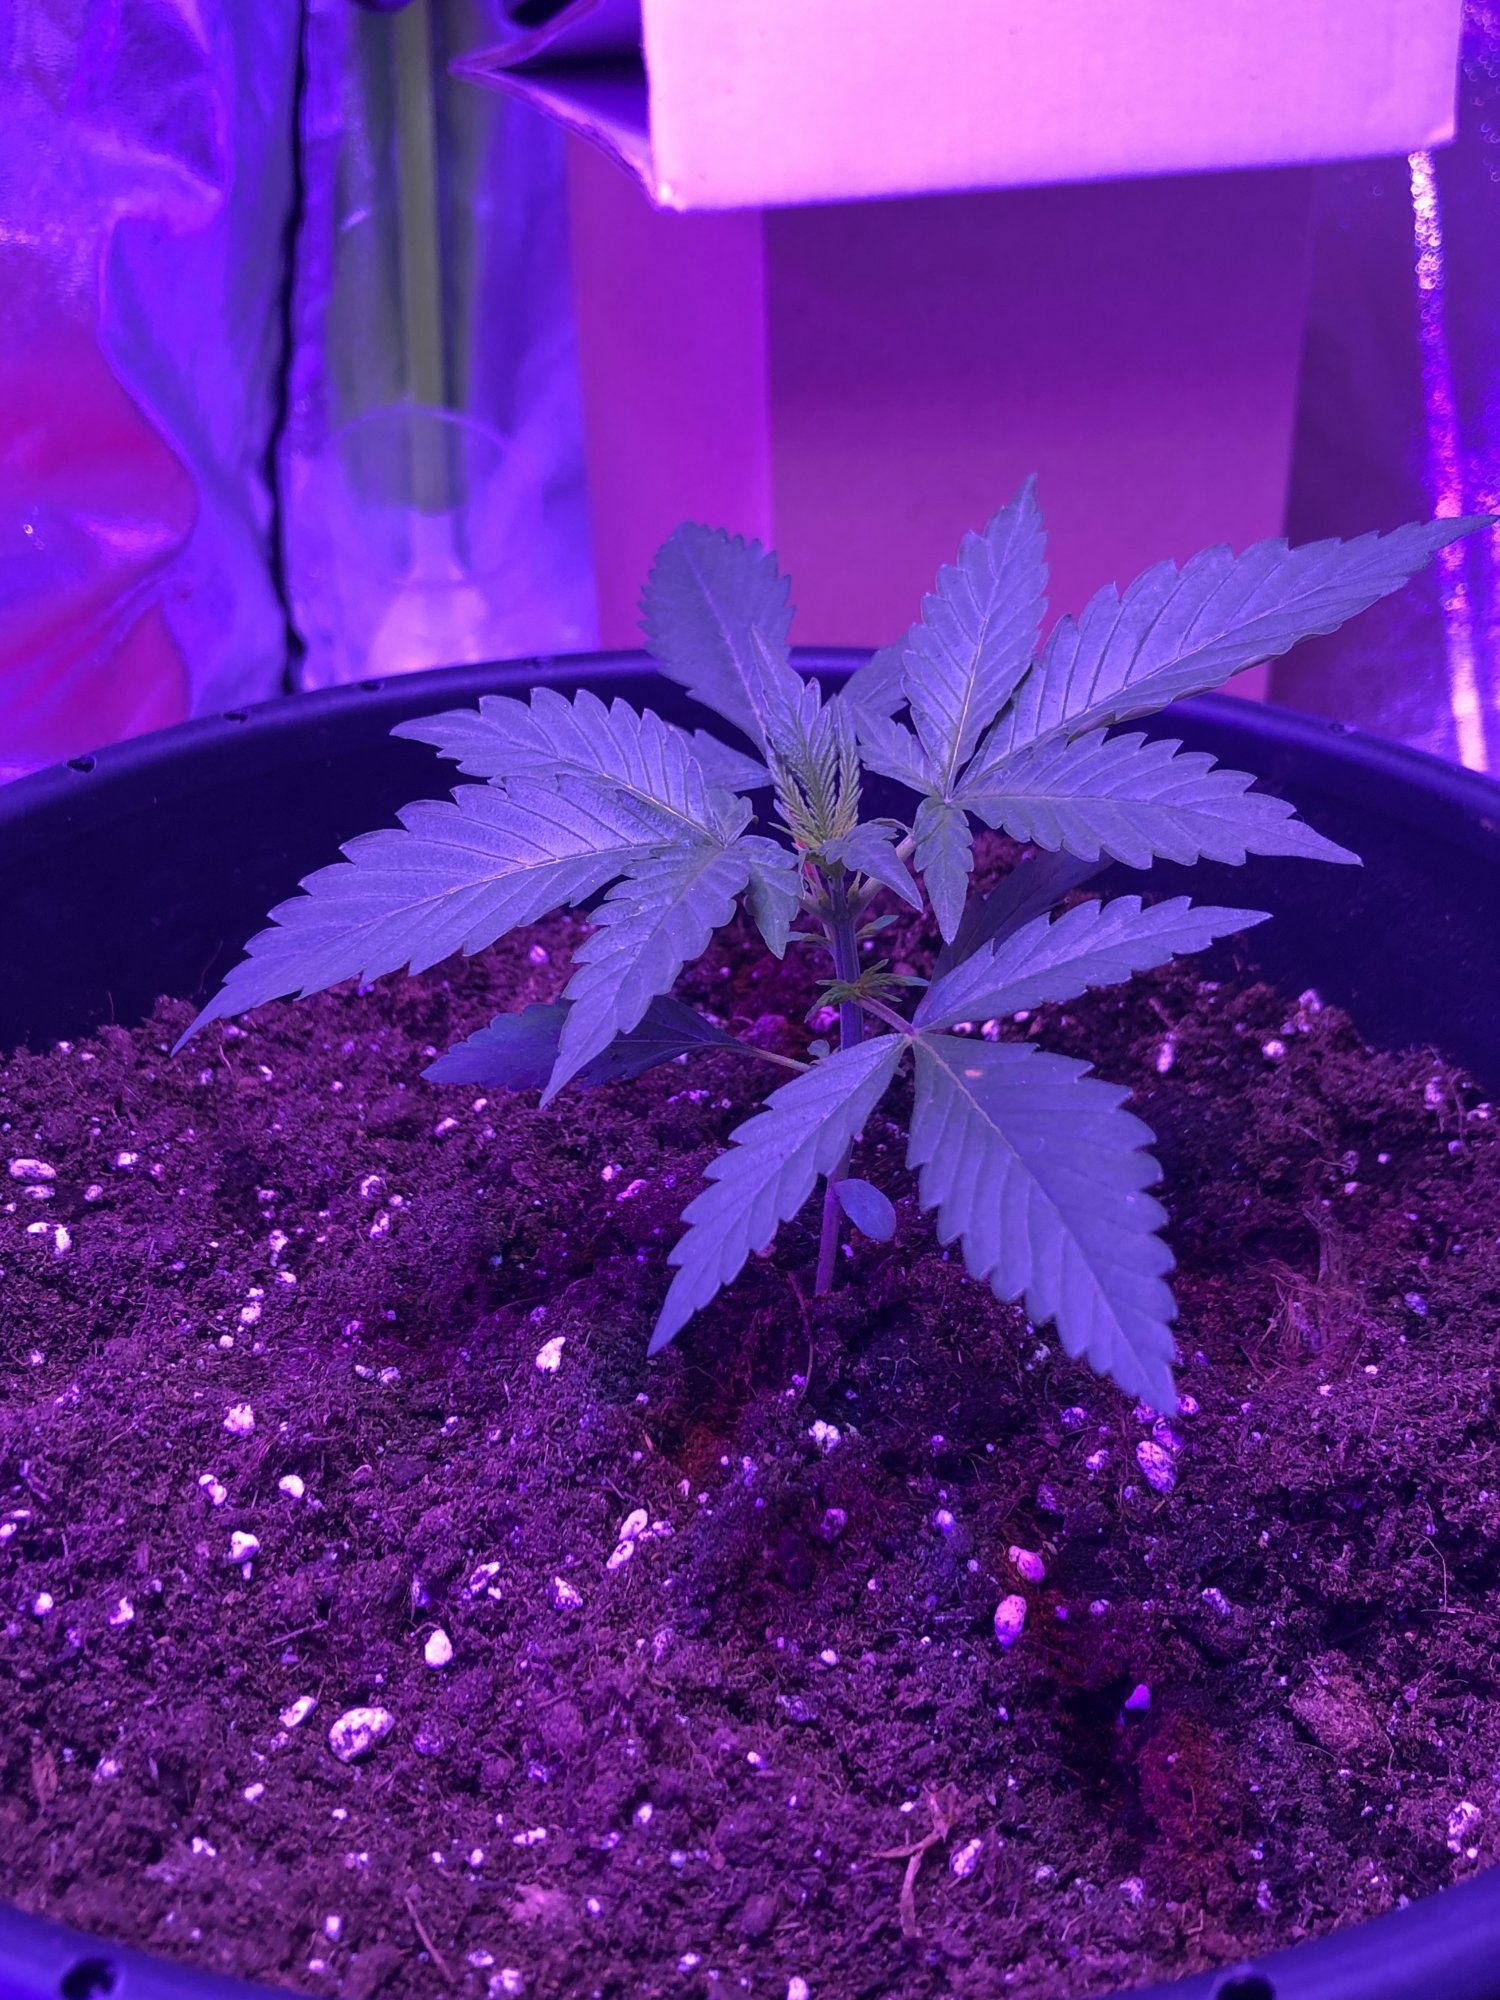 First timer autos colorado cookie wish me luck 6